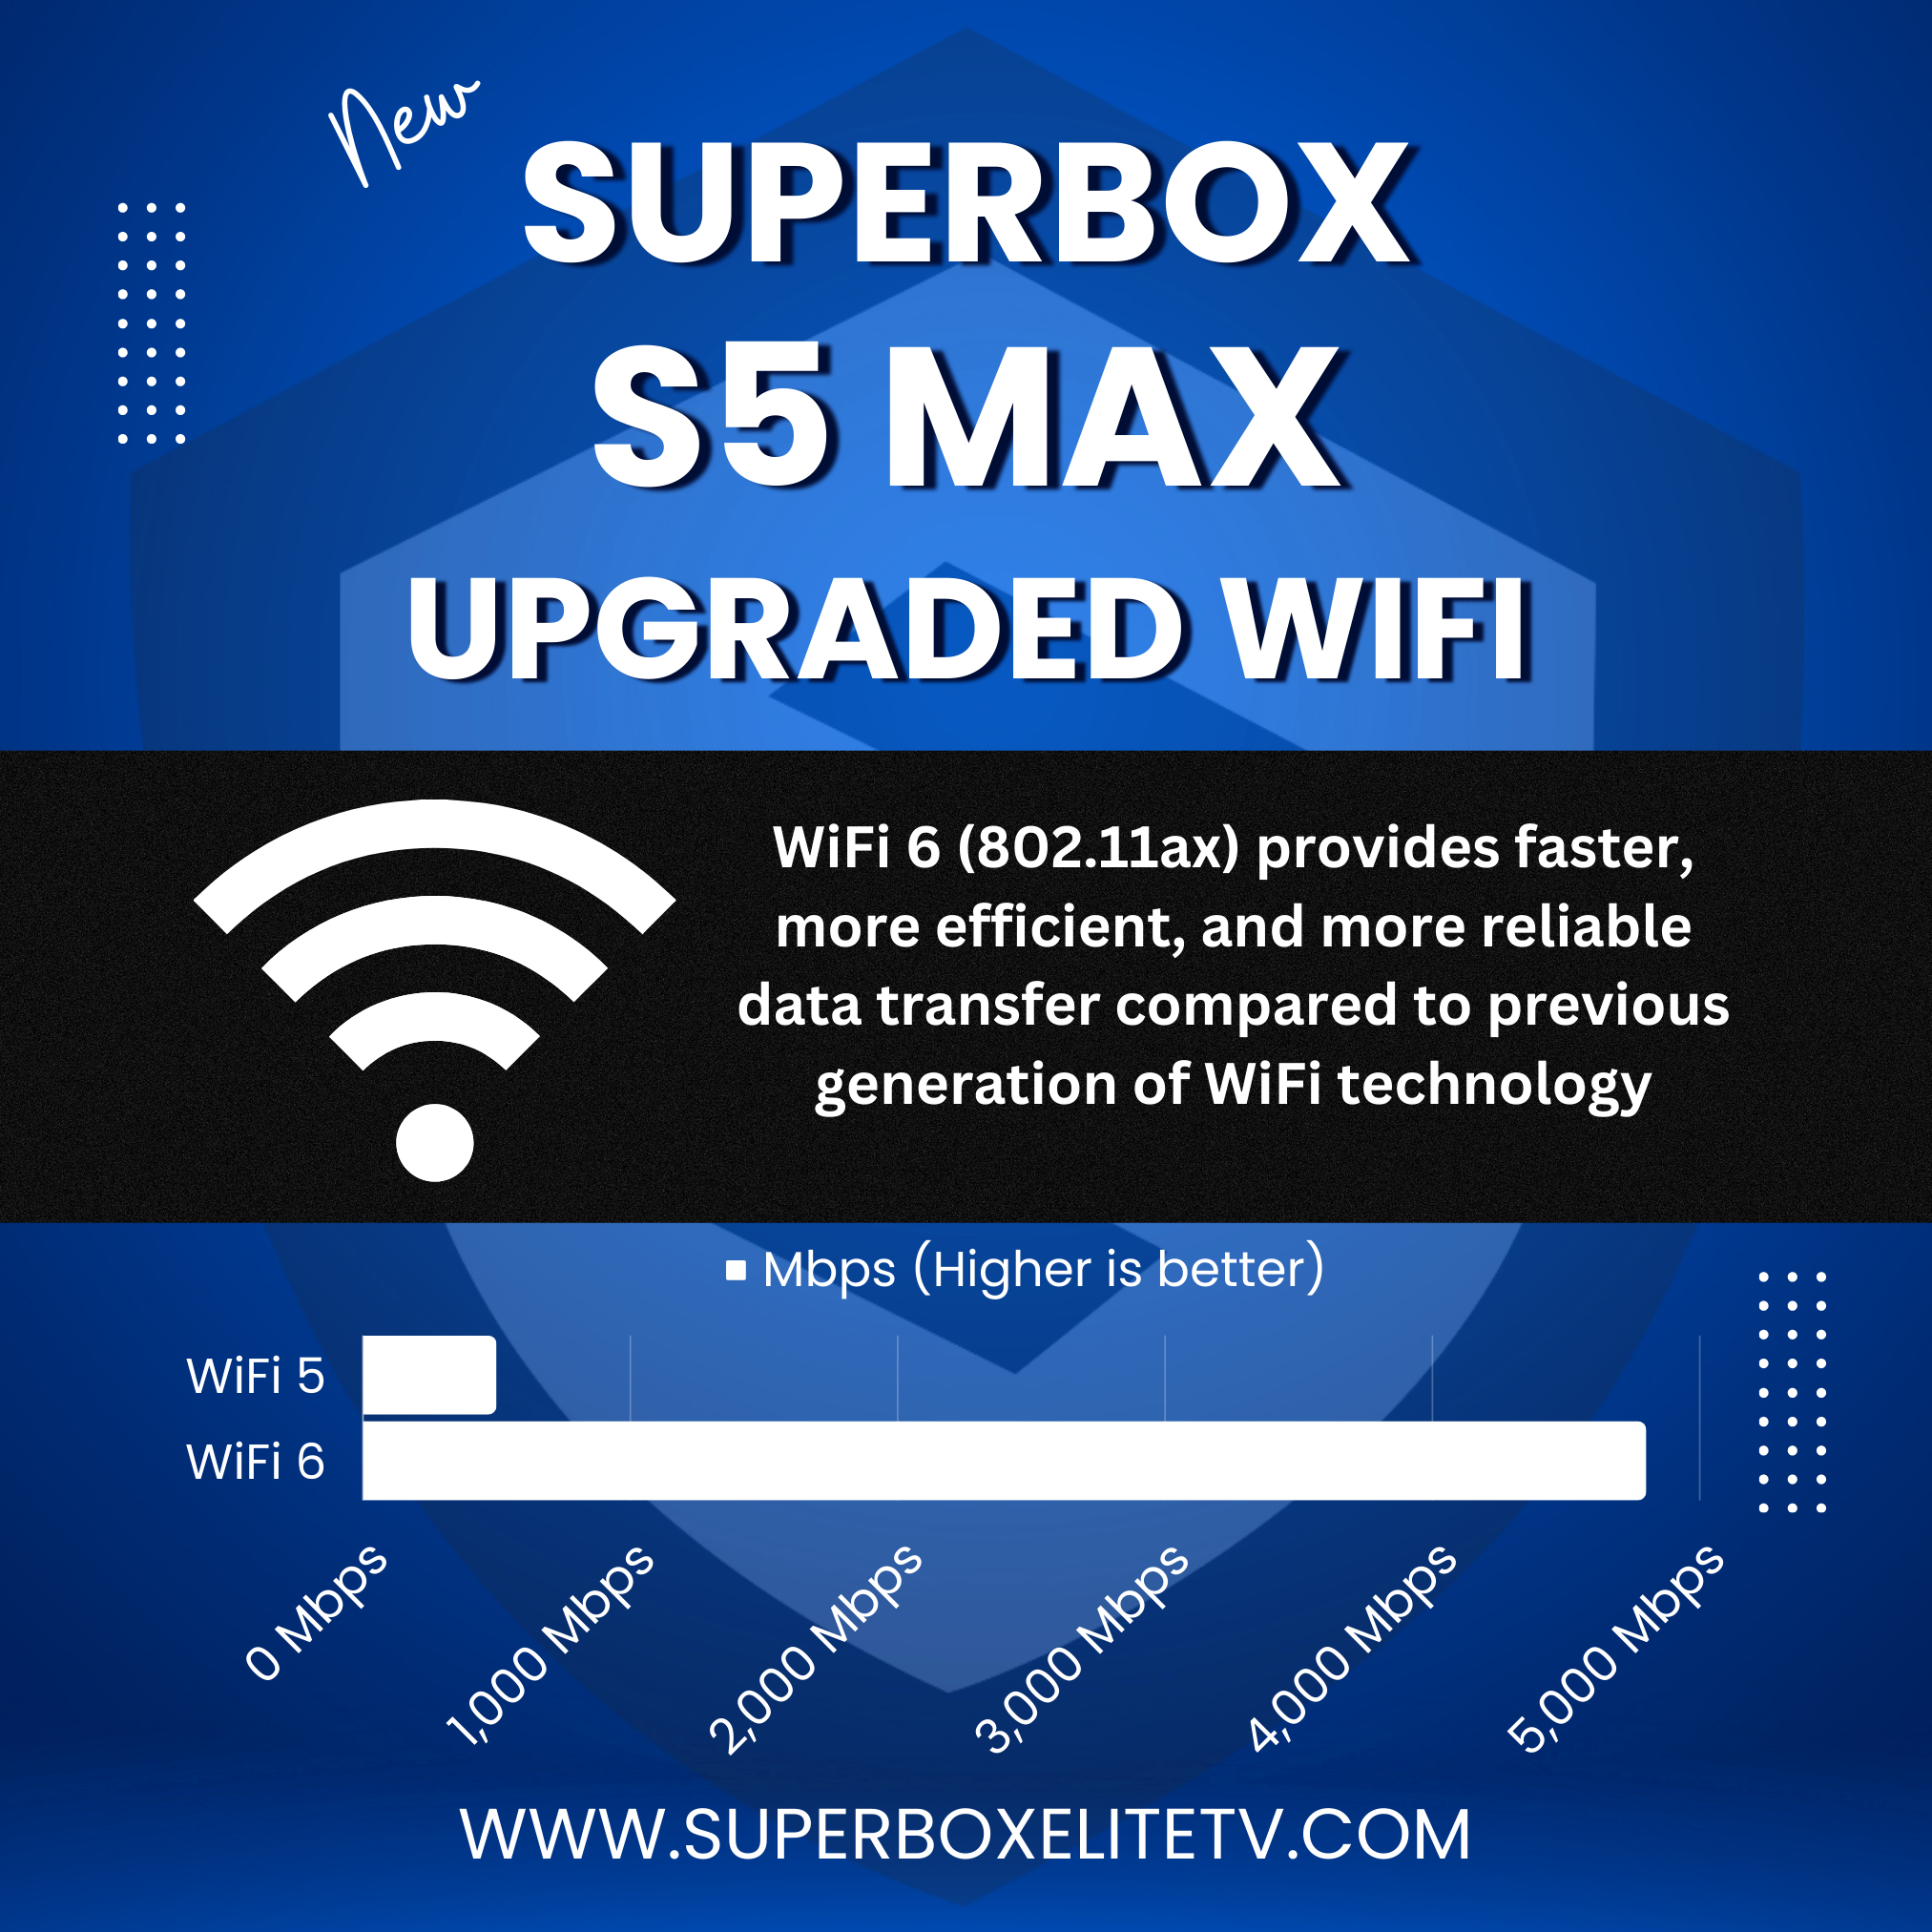 SuperBox S5 Max (New) Fully Load 6k 4GB Ram + 64GB, Voice Control Remote, ANDROID TV Dual Band Wi-Fi, 7 Days Playback Ultra HD 6K Video Player